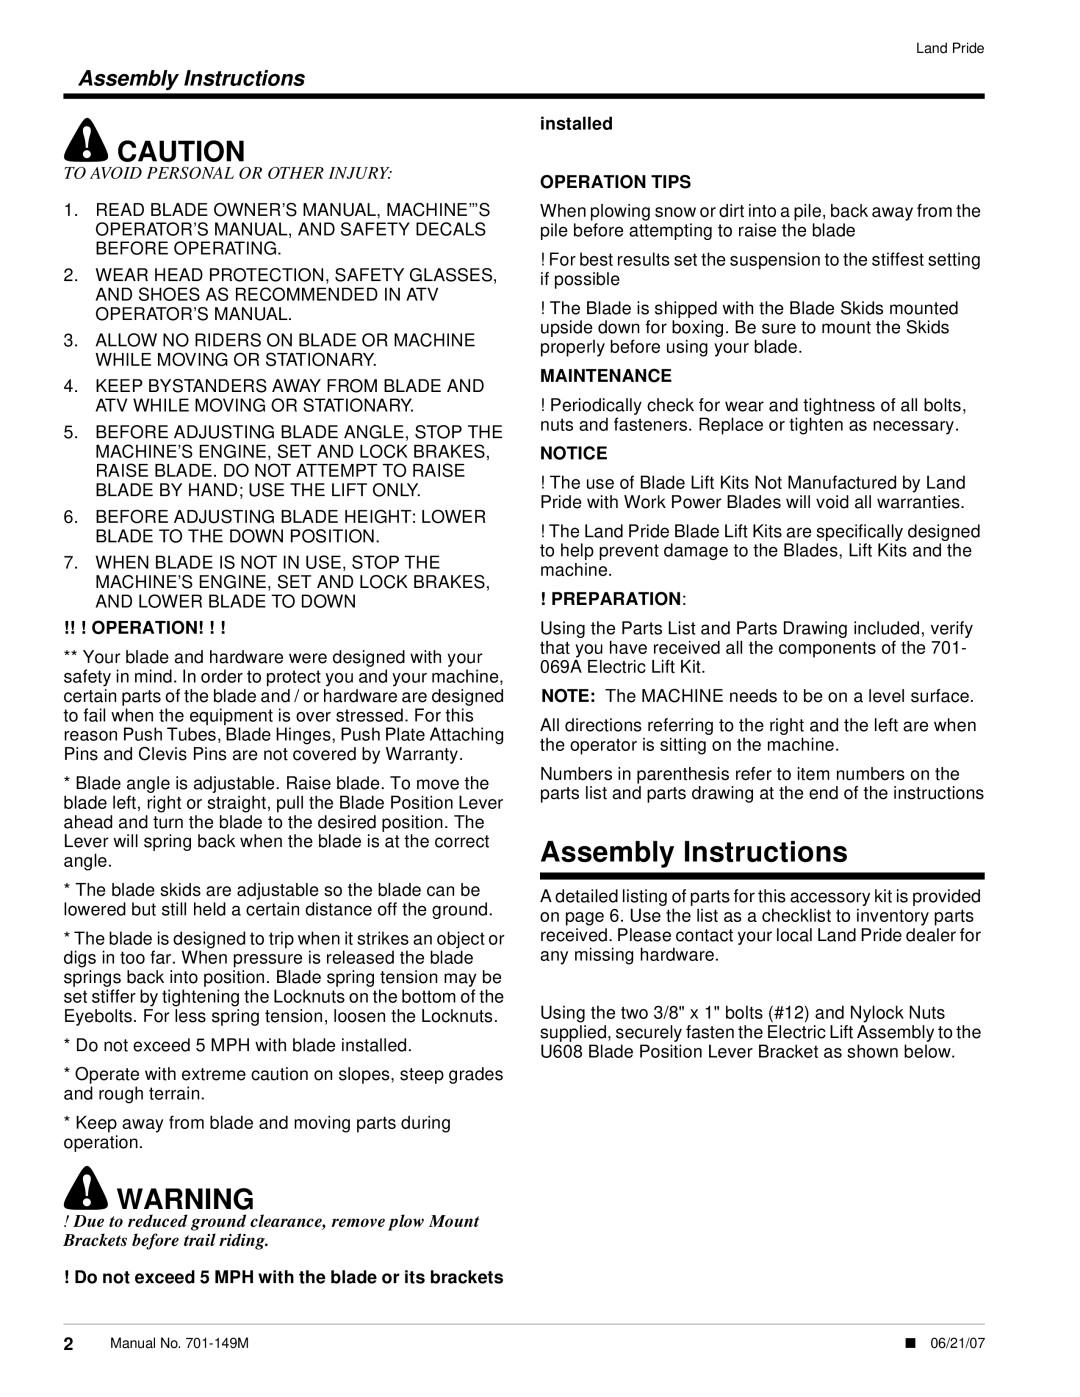 Land Pride 701-069A Assembly Instructions, To Avoid Personal Or Other Injury, Operation, installed OPERATION TIPS 